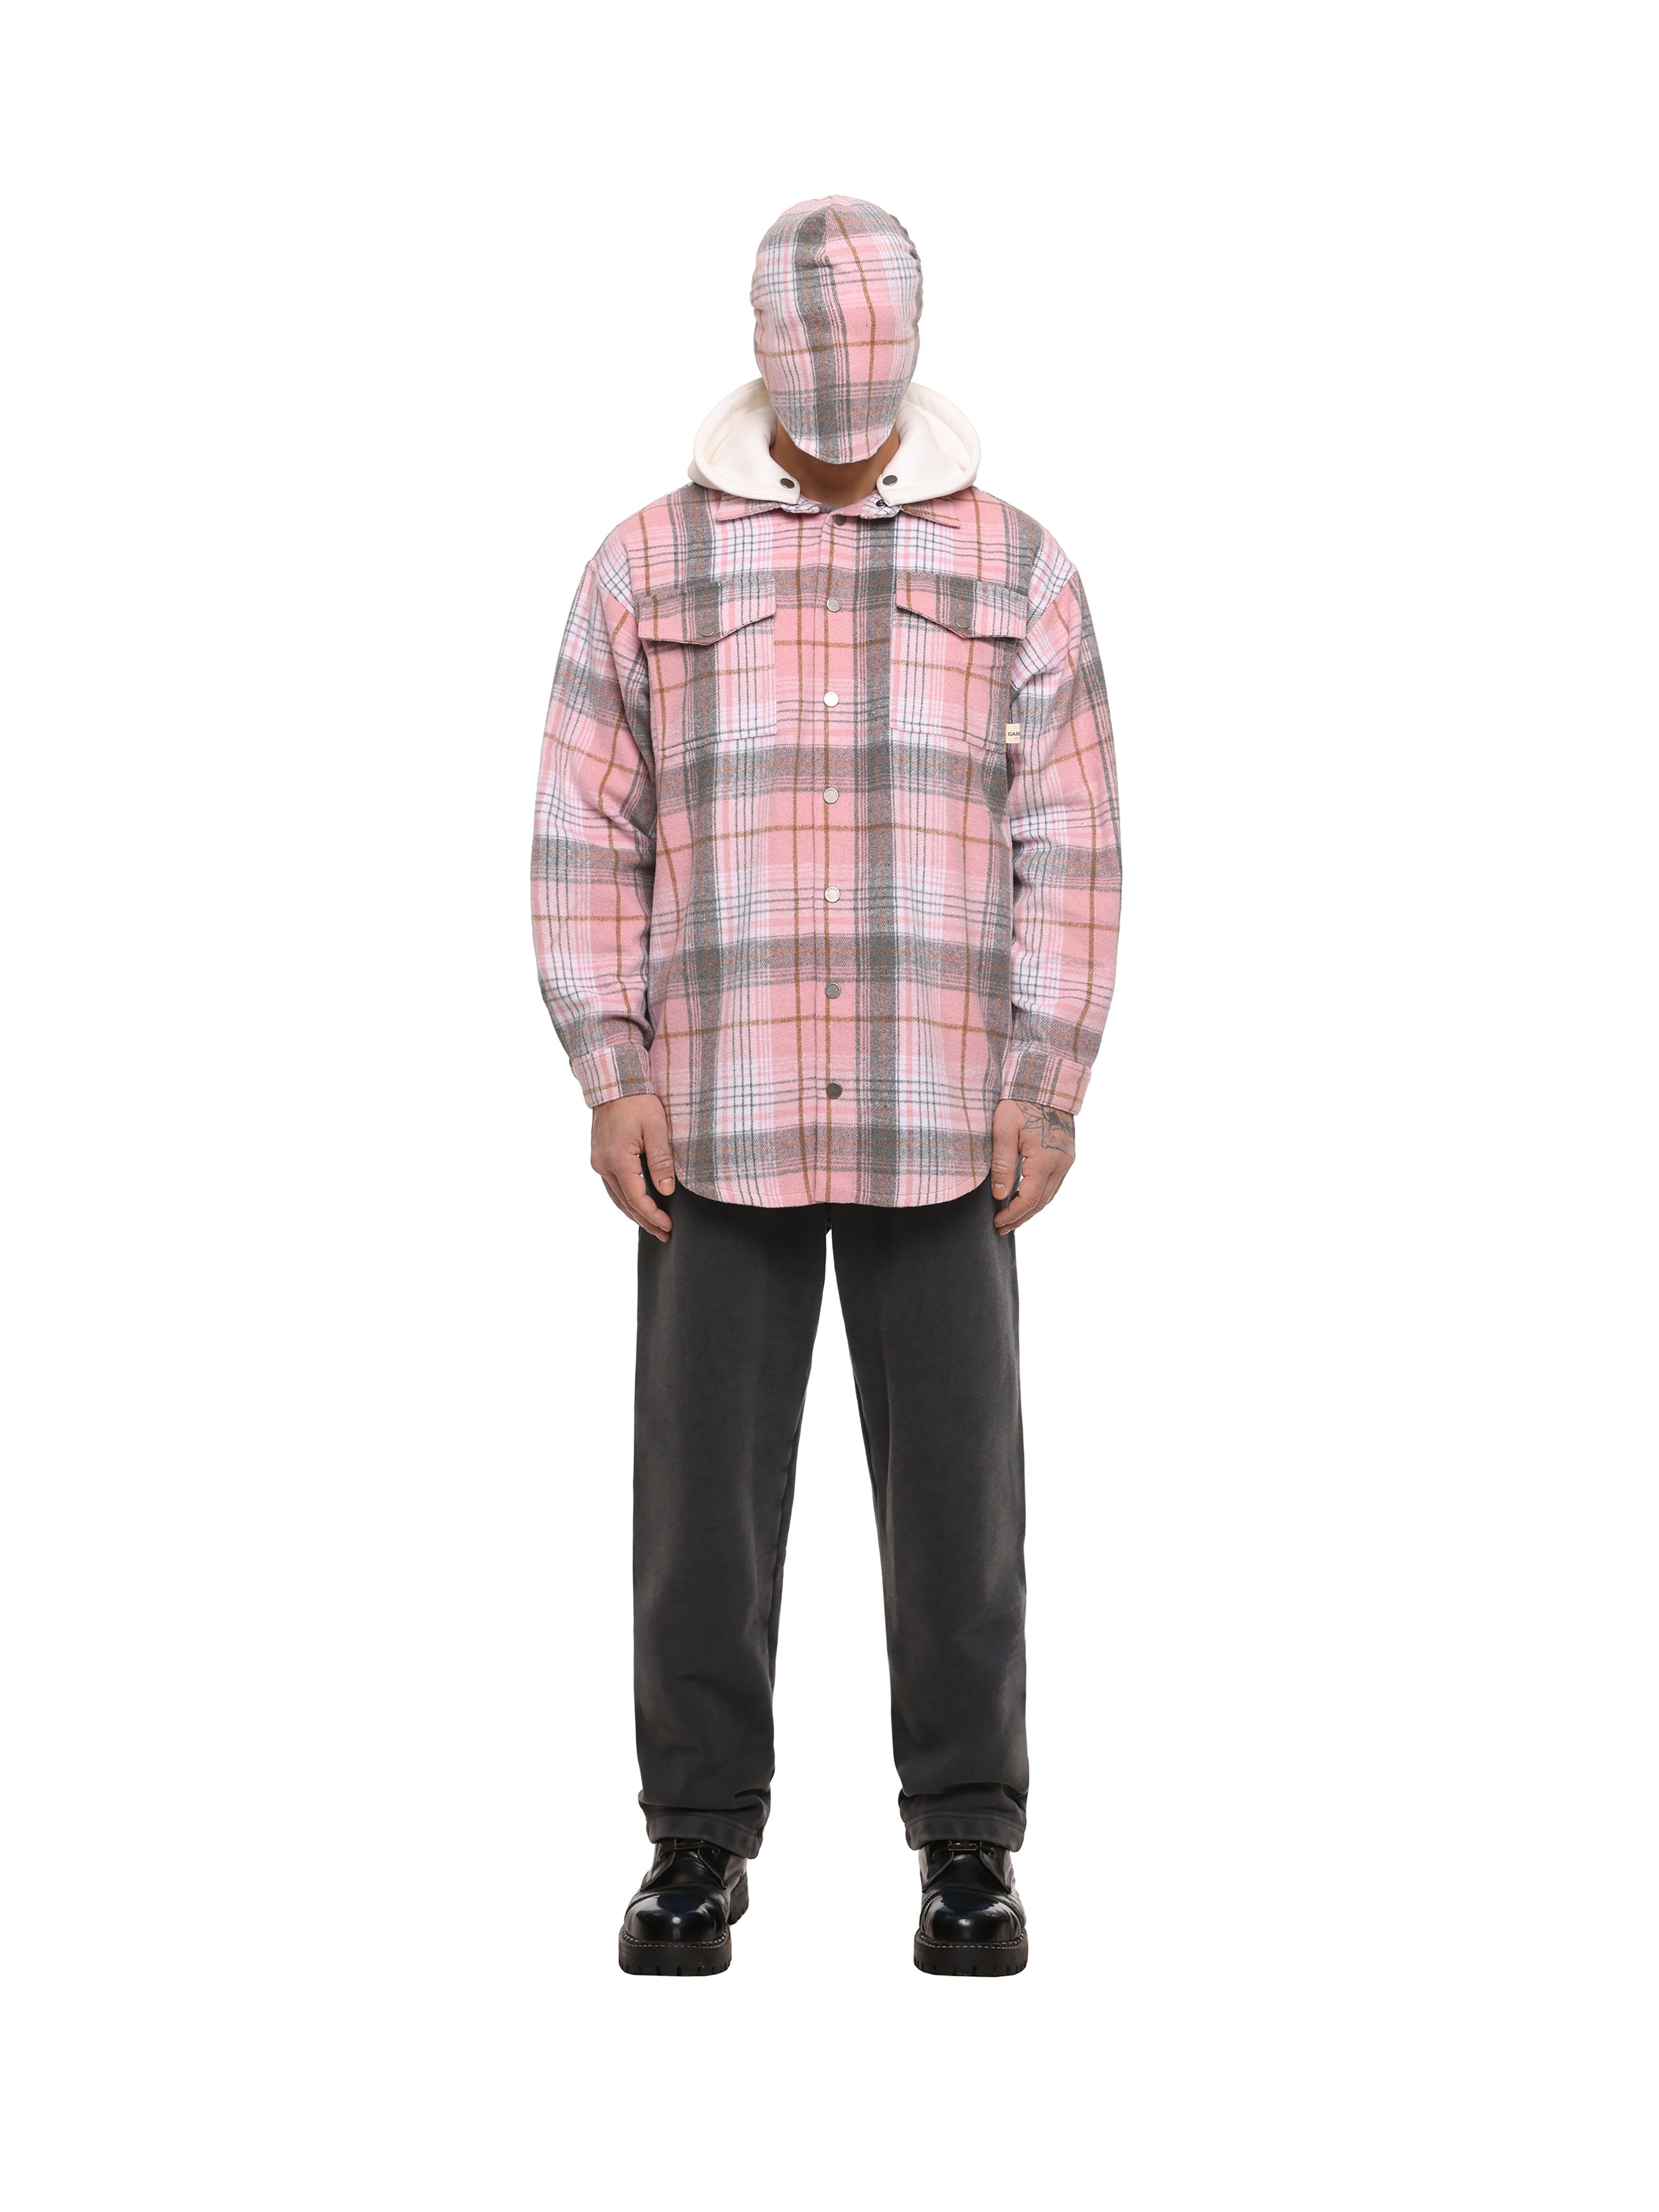 Checked shirt with hoodie